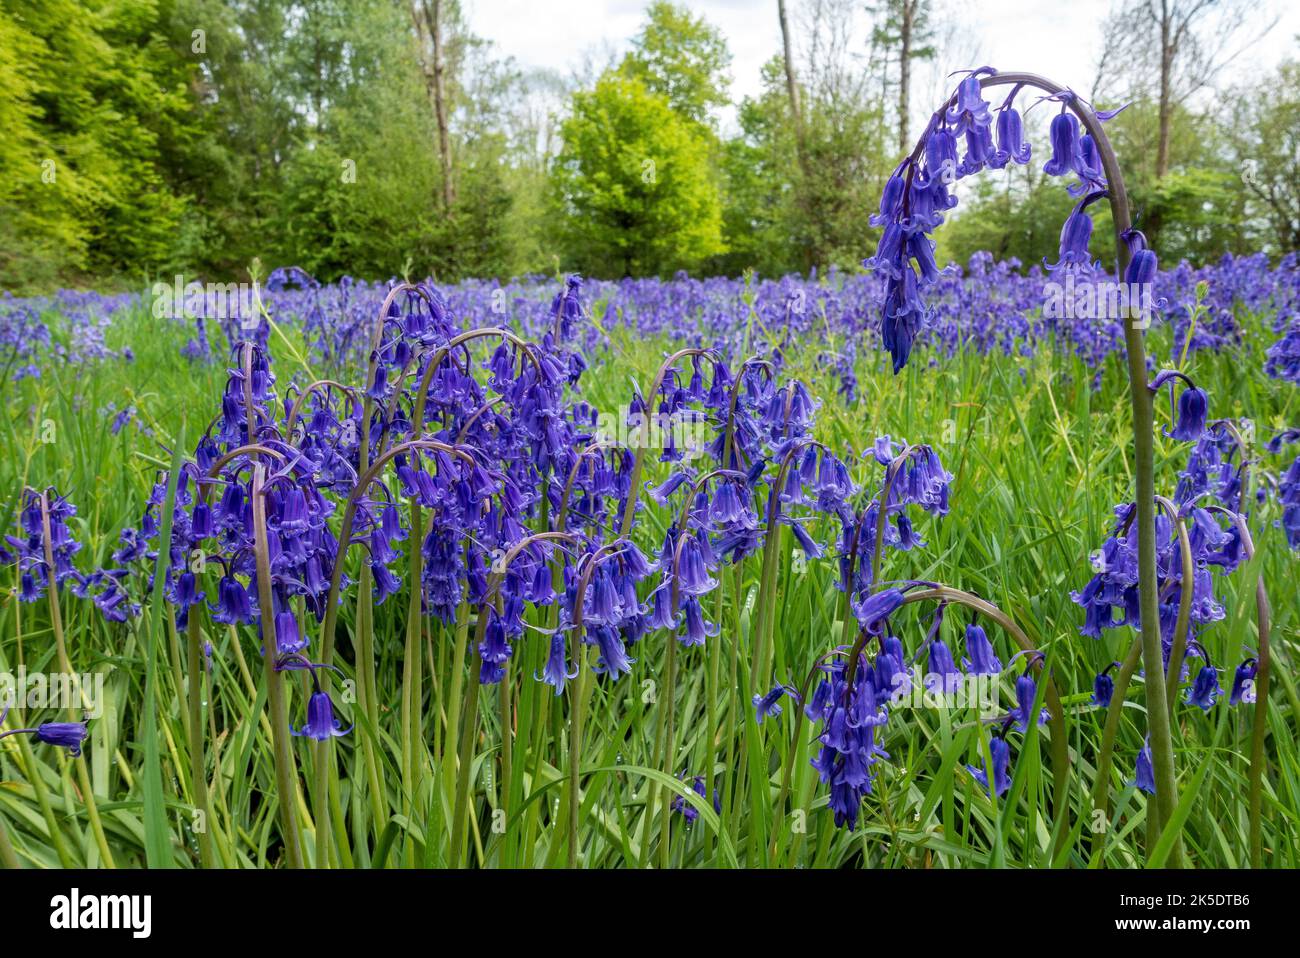 The violet glow of a bluebells on display at Hampage Wood near Winchester in Hampshire, England, UK Stock Photo